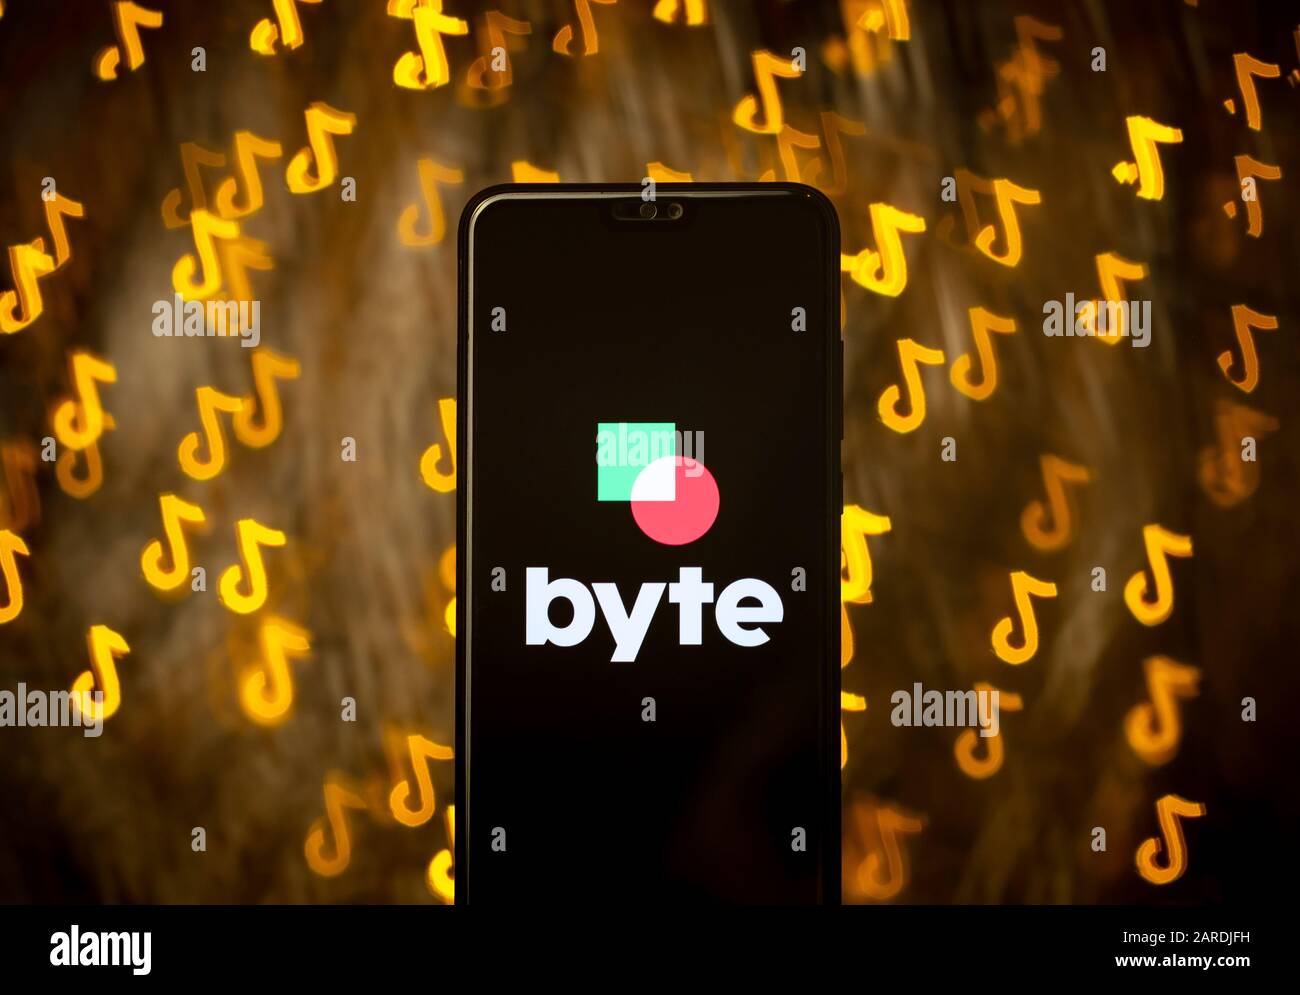 Byte app logo on smartphone and bokeh in a shape of TikTok logo on background. Not a montage. No photo editing. Custom bokeh shape technique is used. Stock Photo